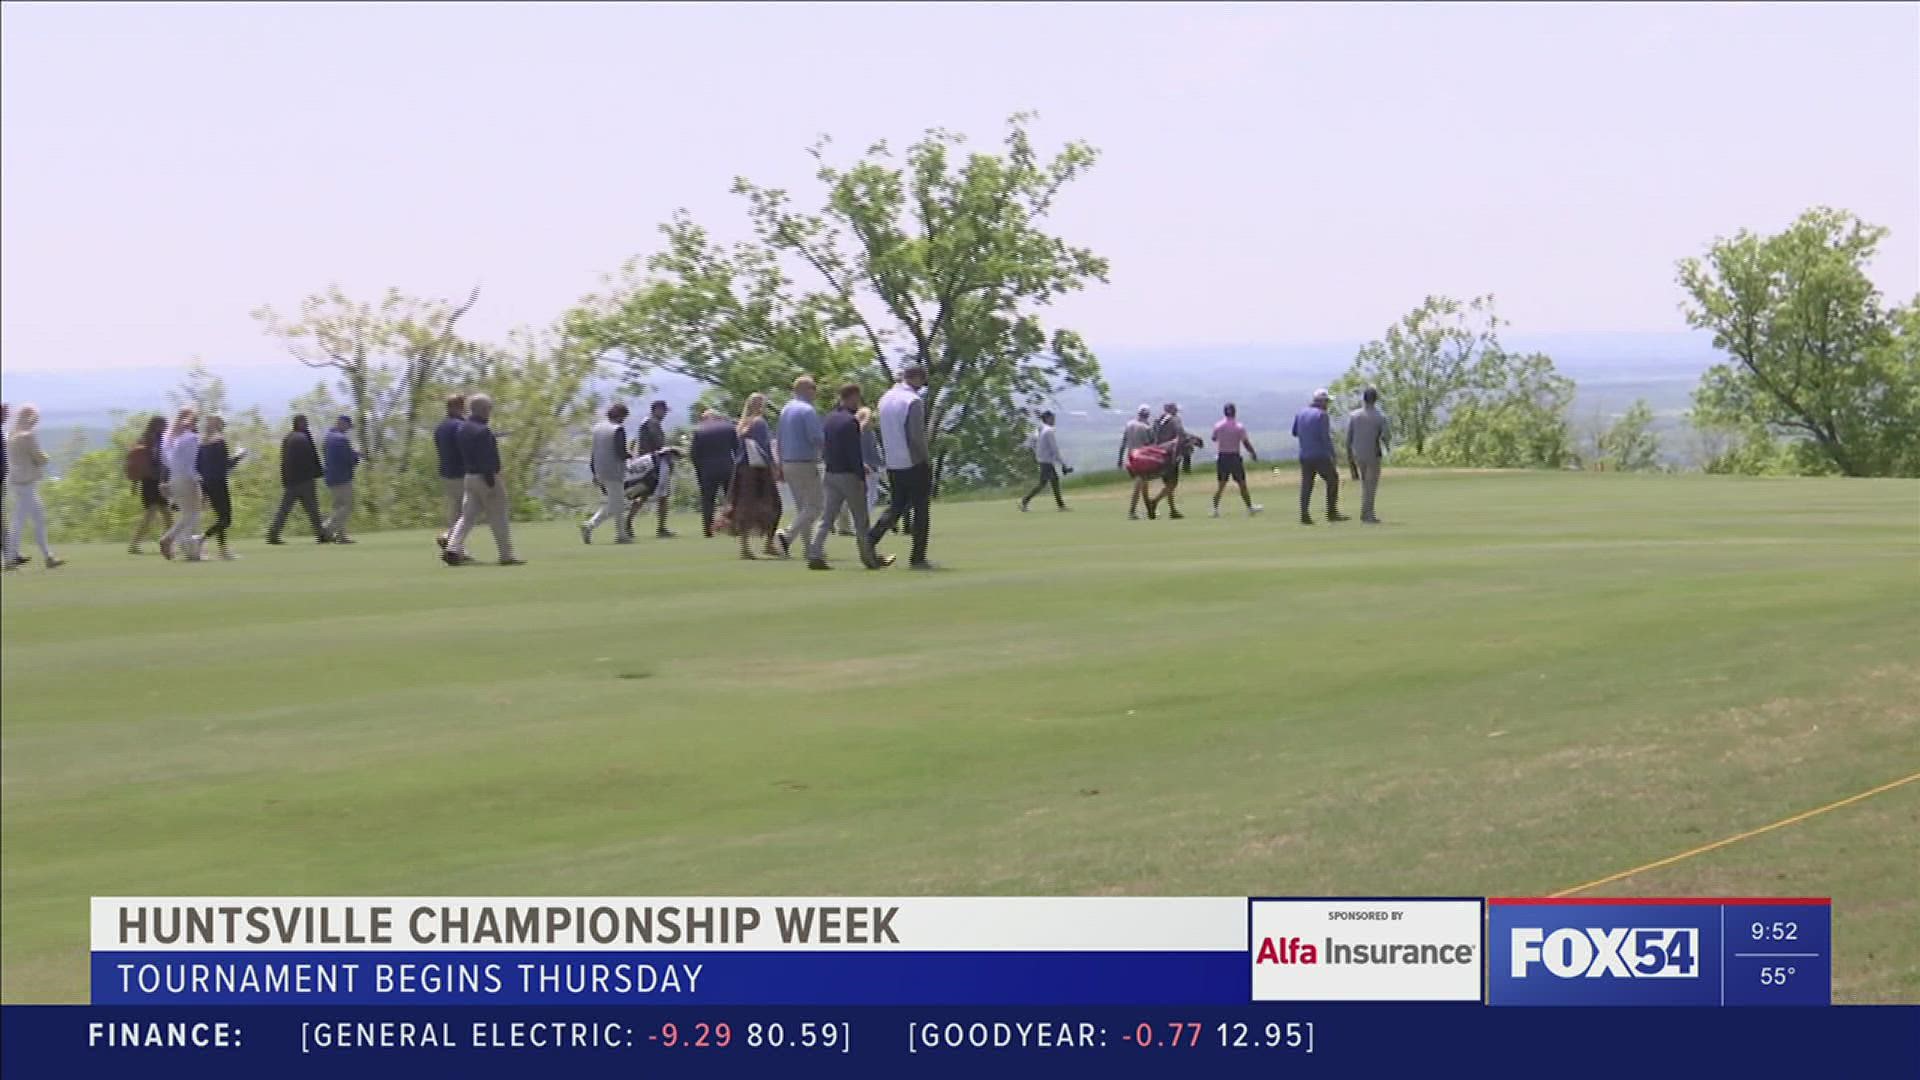 The 2022 Huntsville Championship begins later this week. On Tuesday, golfers on the tour got a feel of the Ledges during their practice sessions.